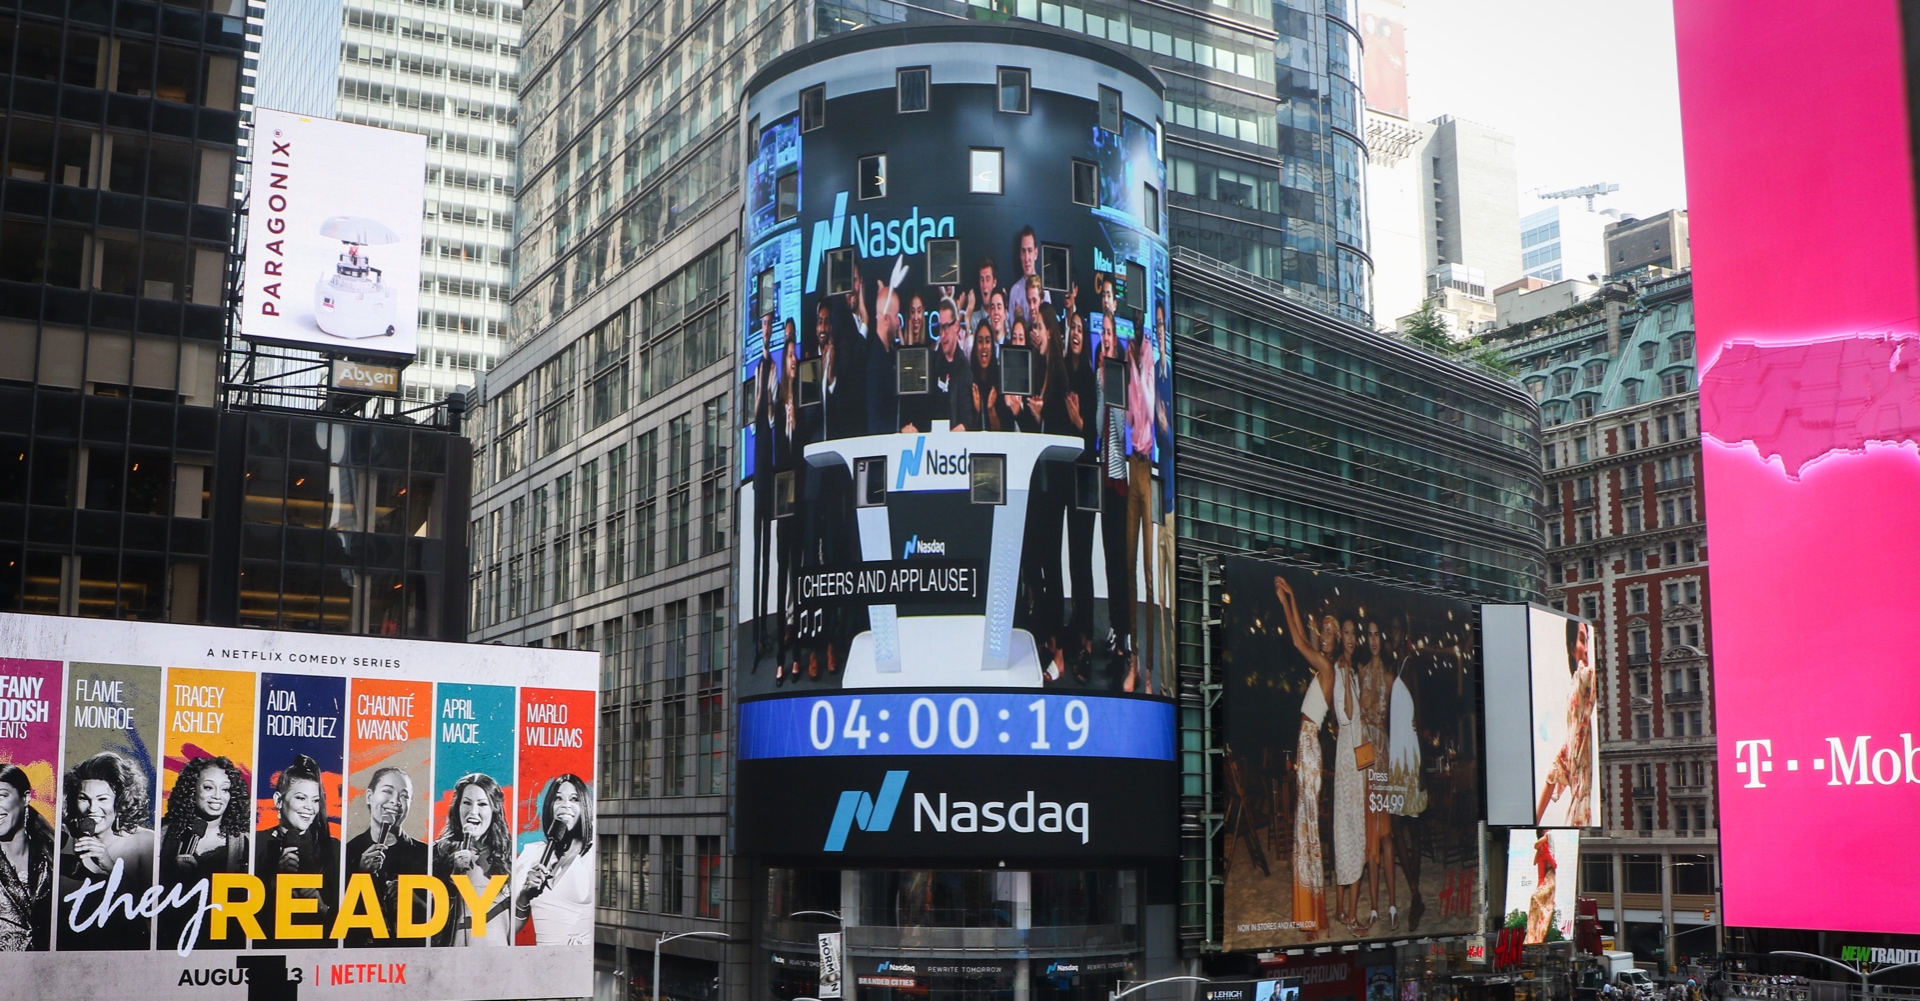 Lehigh students on Nasdaq Tower in Times Square